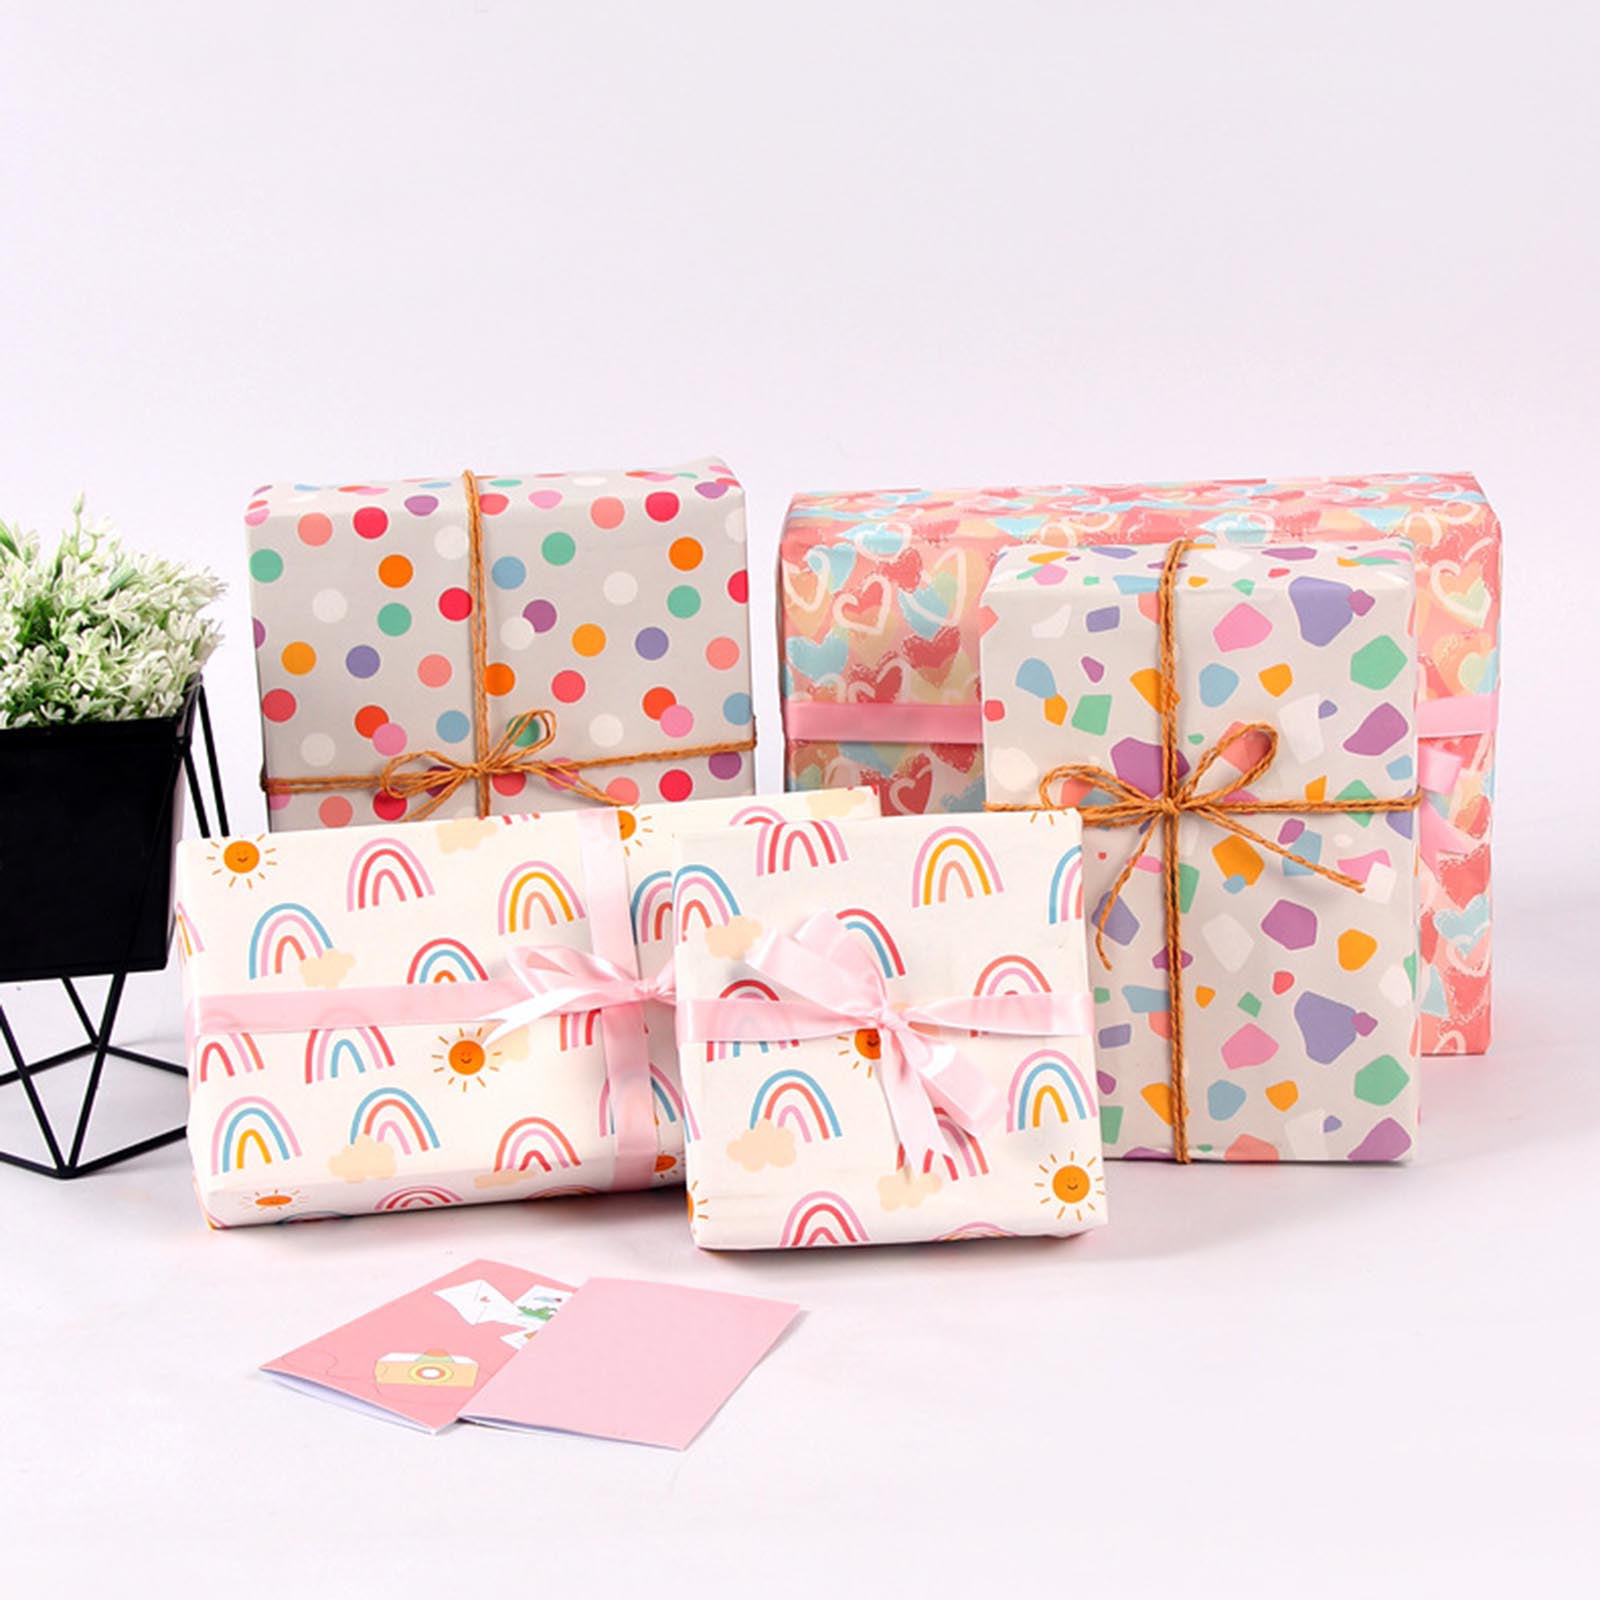 1pcs Valentine's Day Floral Printed Wrapping Paper Valentine Aluminum  Holiday Gift Paper Gift Wrapping Craft Papers 70cmx50cm